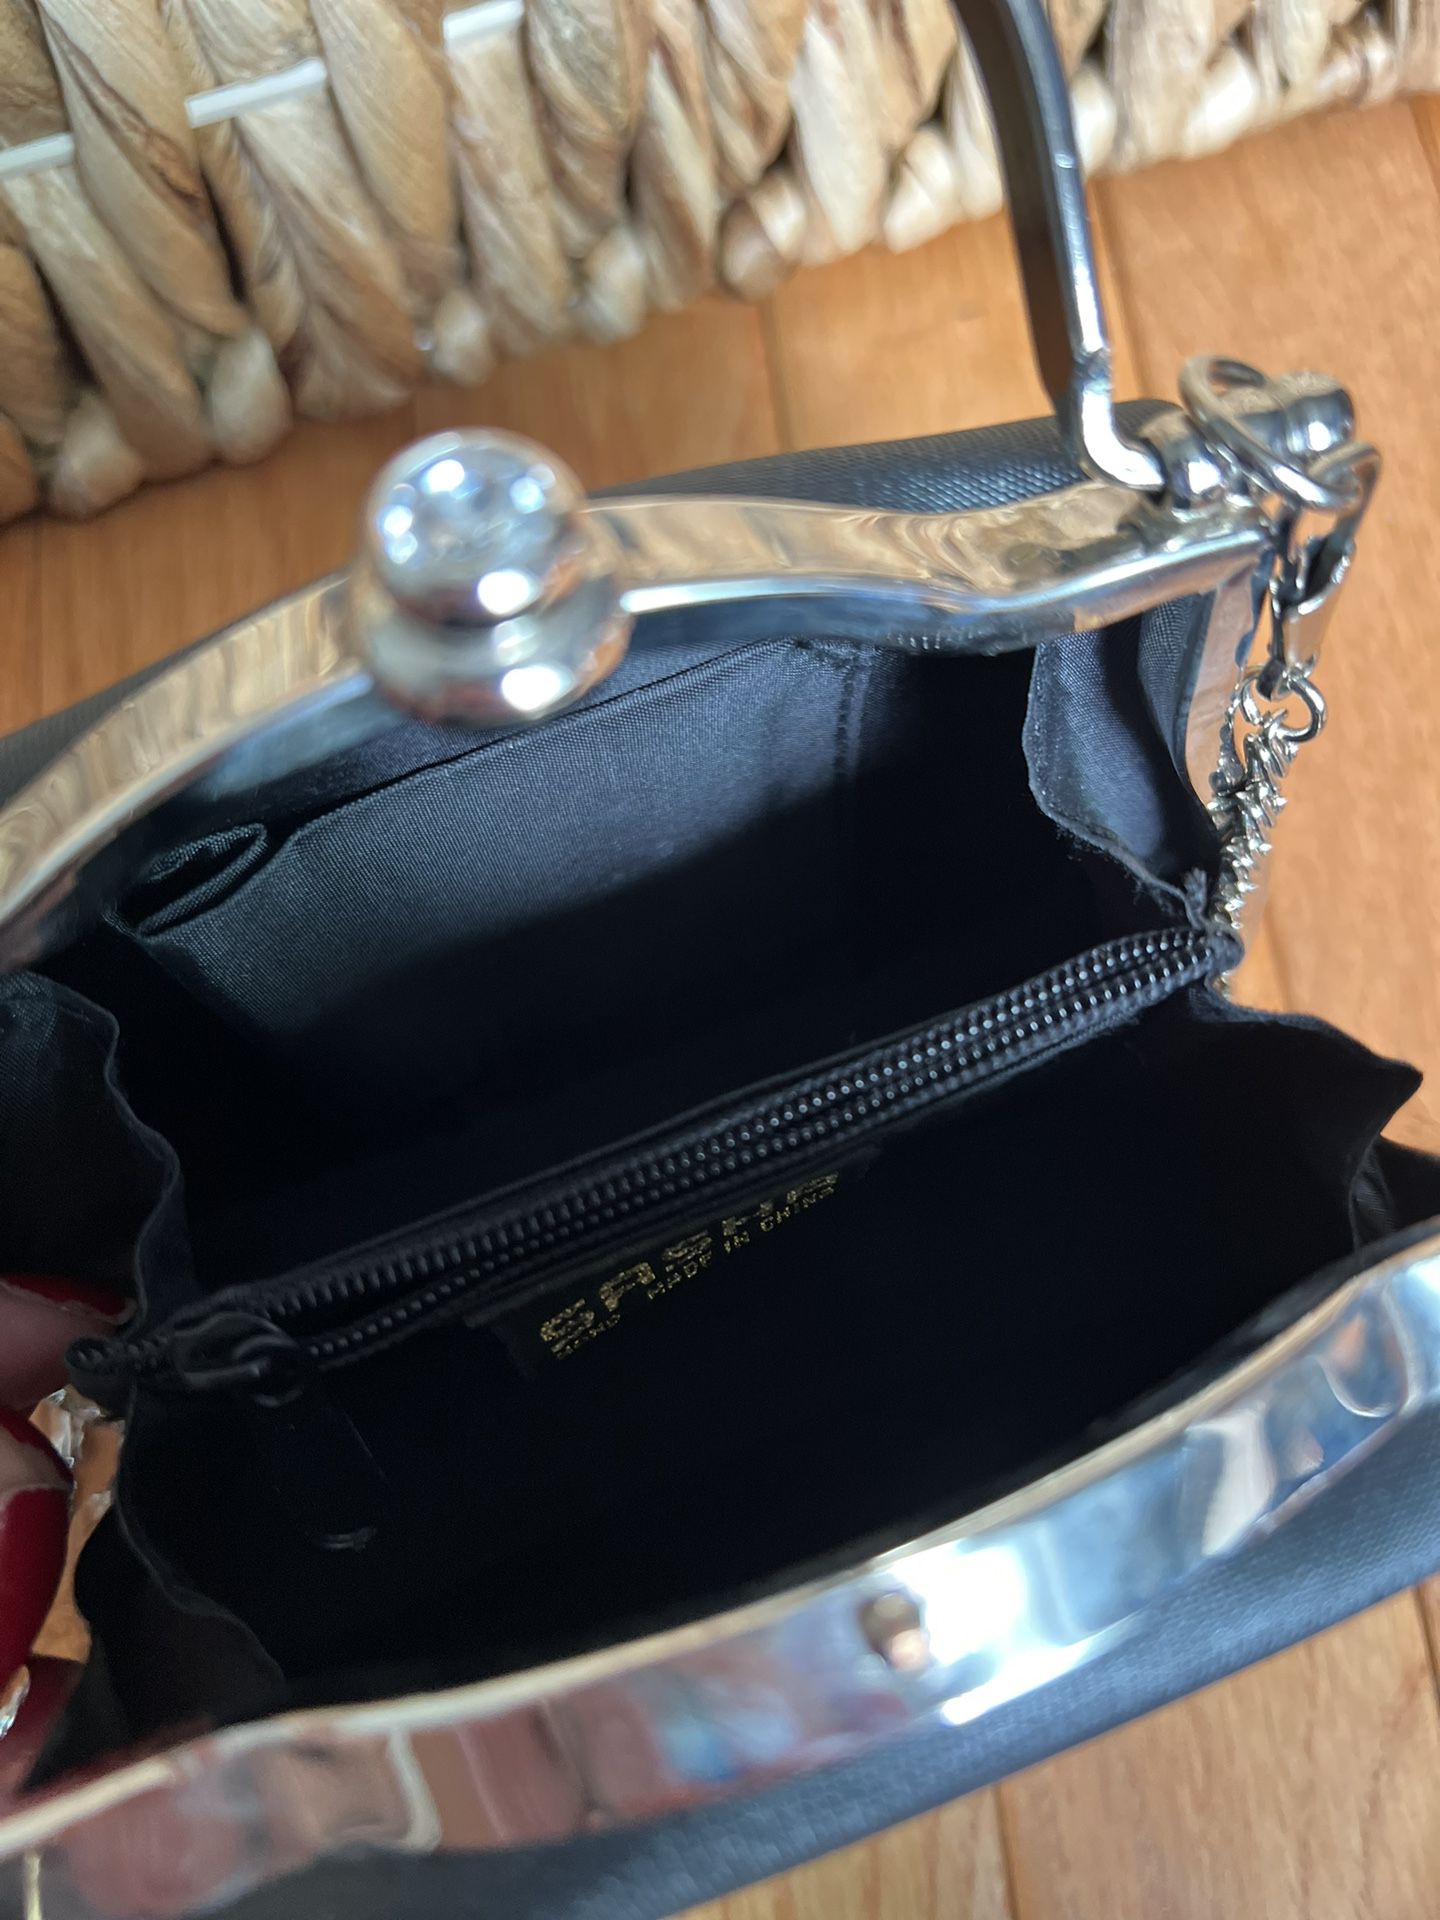 Evening Bag - Black Satin with top handle and detachable chain strap